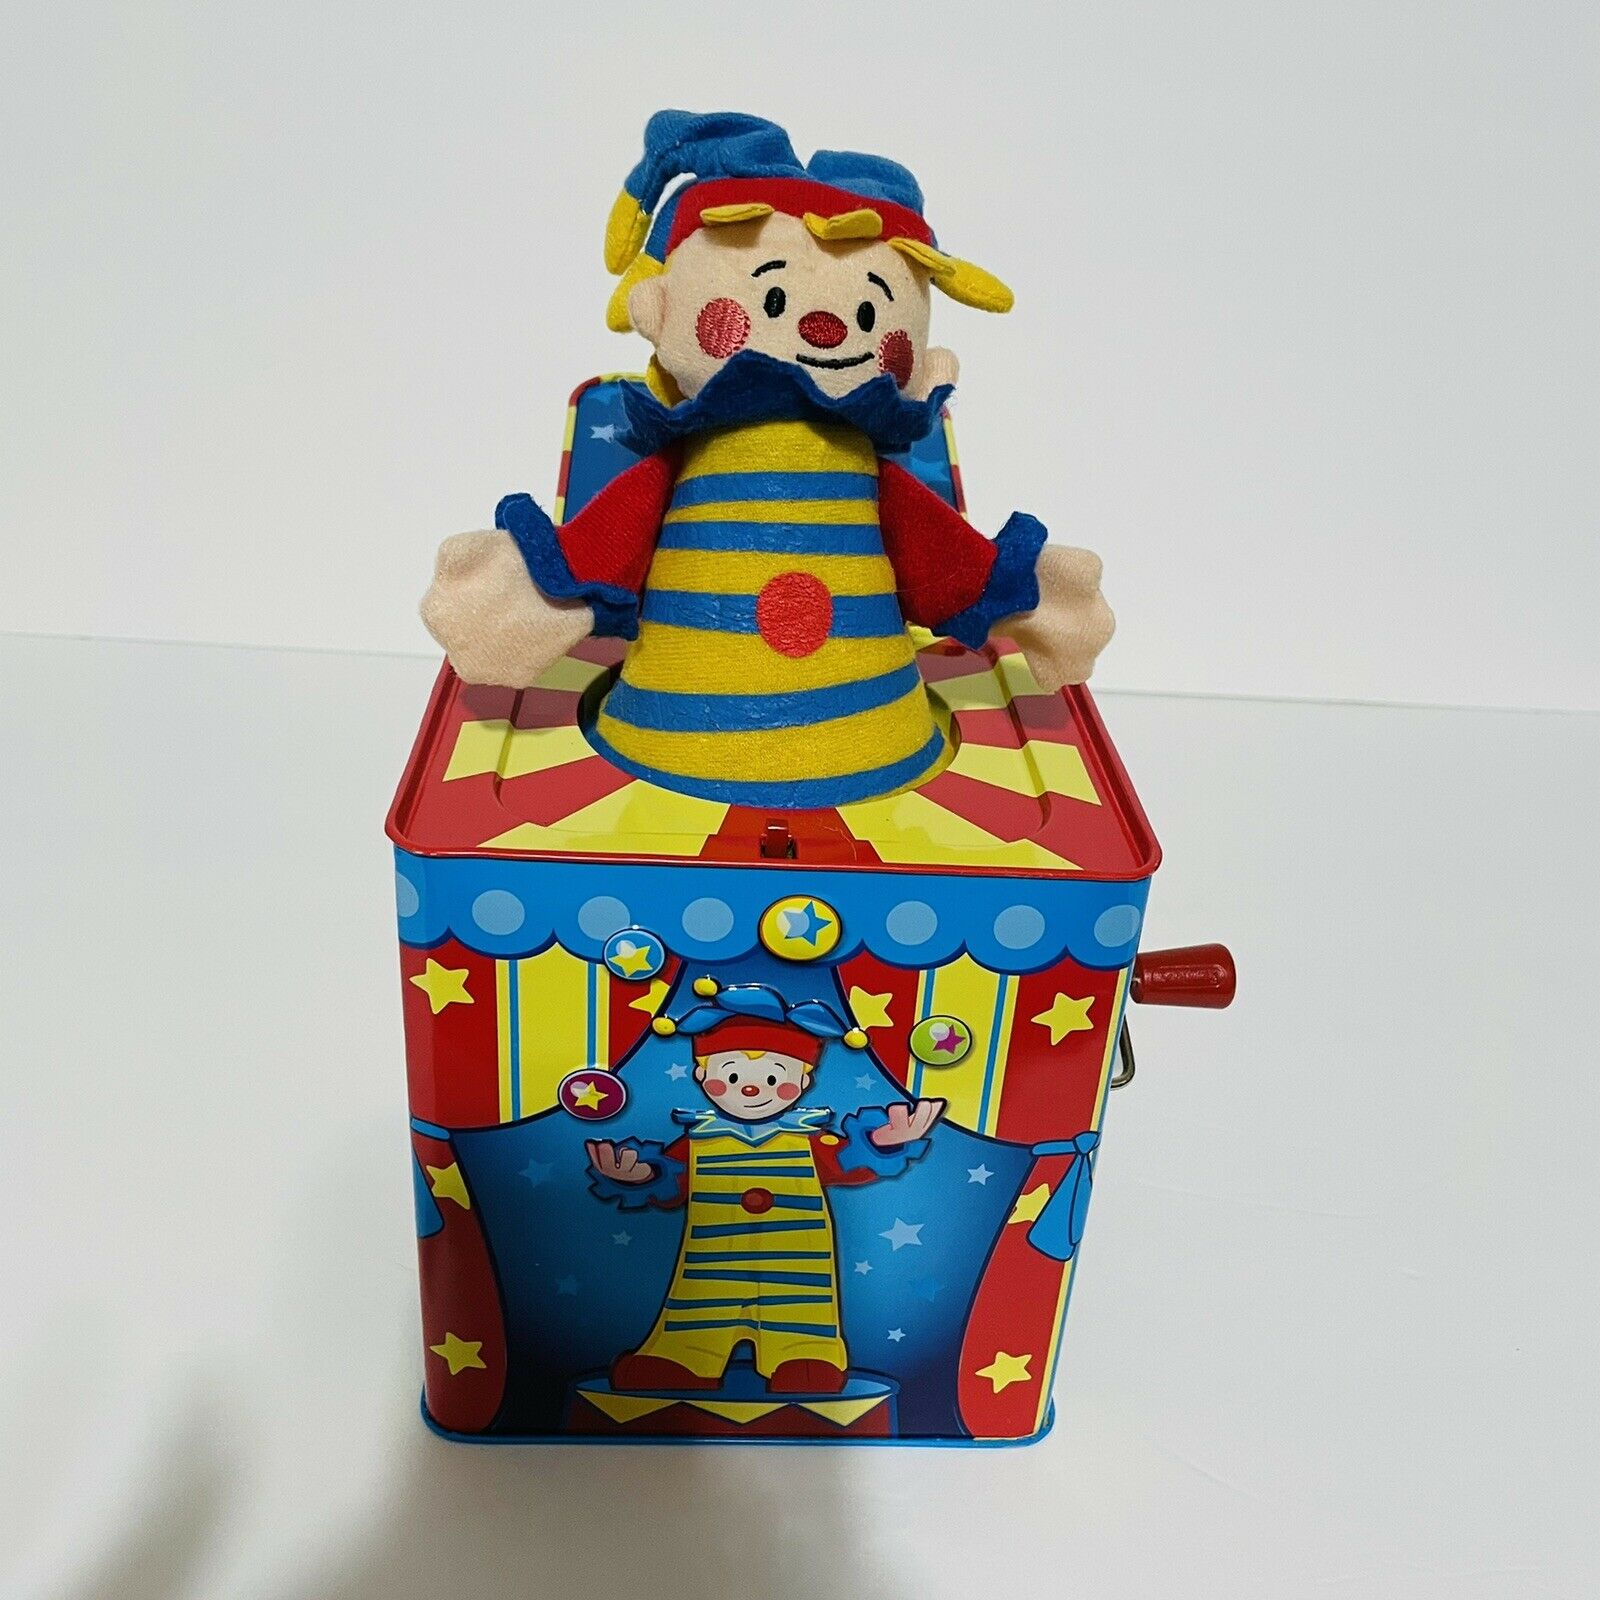 Schylling's Silly Circus Jack In The Box Jester Clown Toy Music Animals Metal 10